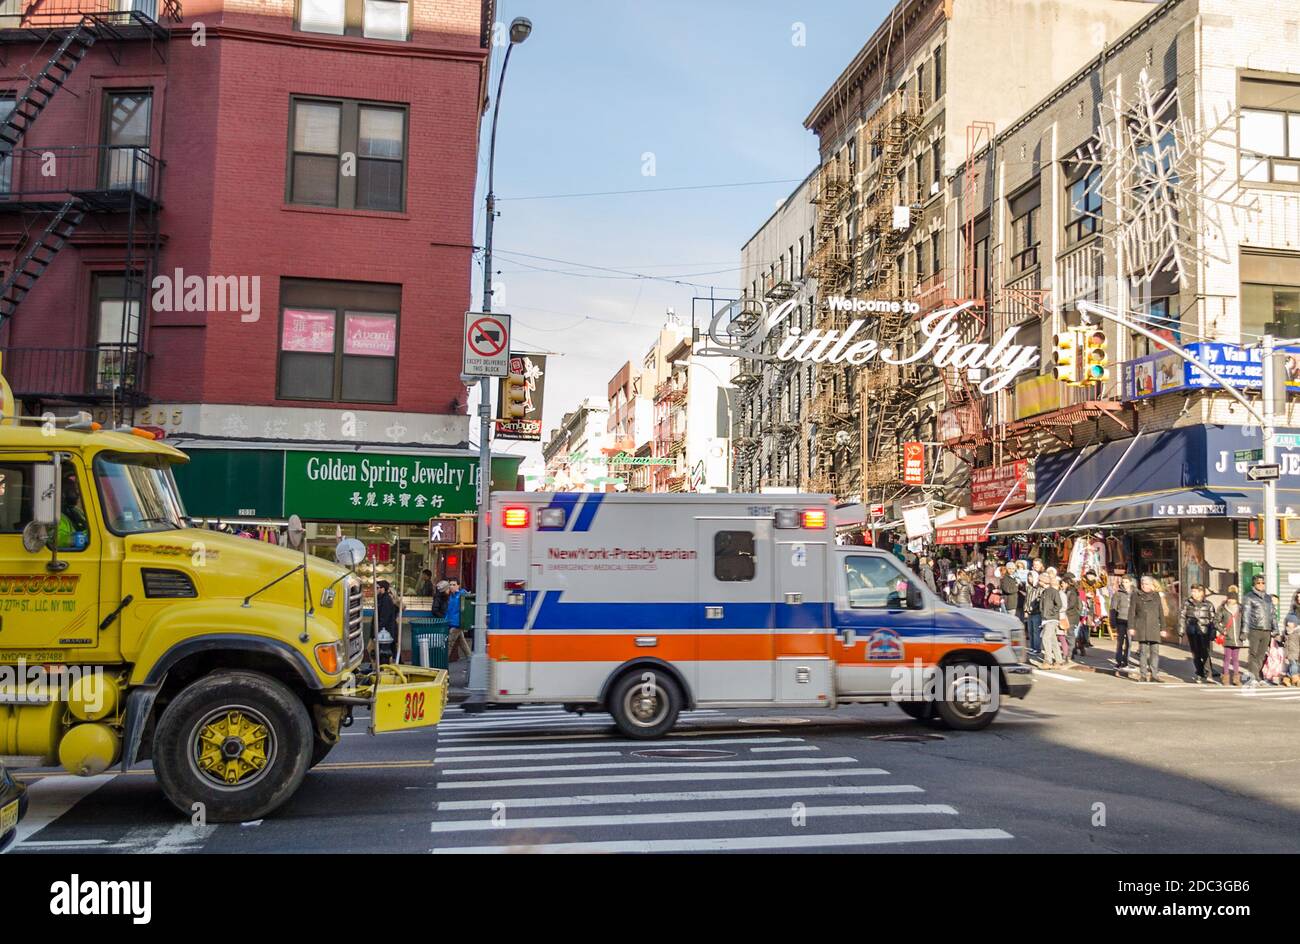 Ordinary Day in Little Italy and Chinatown. Busy Road and Pavement. An Ambulance is passing by the Road and a Yellow Truck Follows Next. Stock Photo